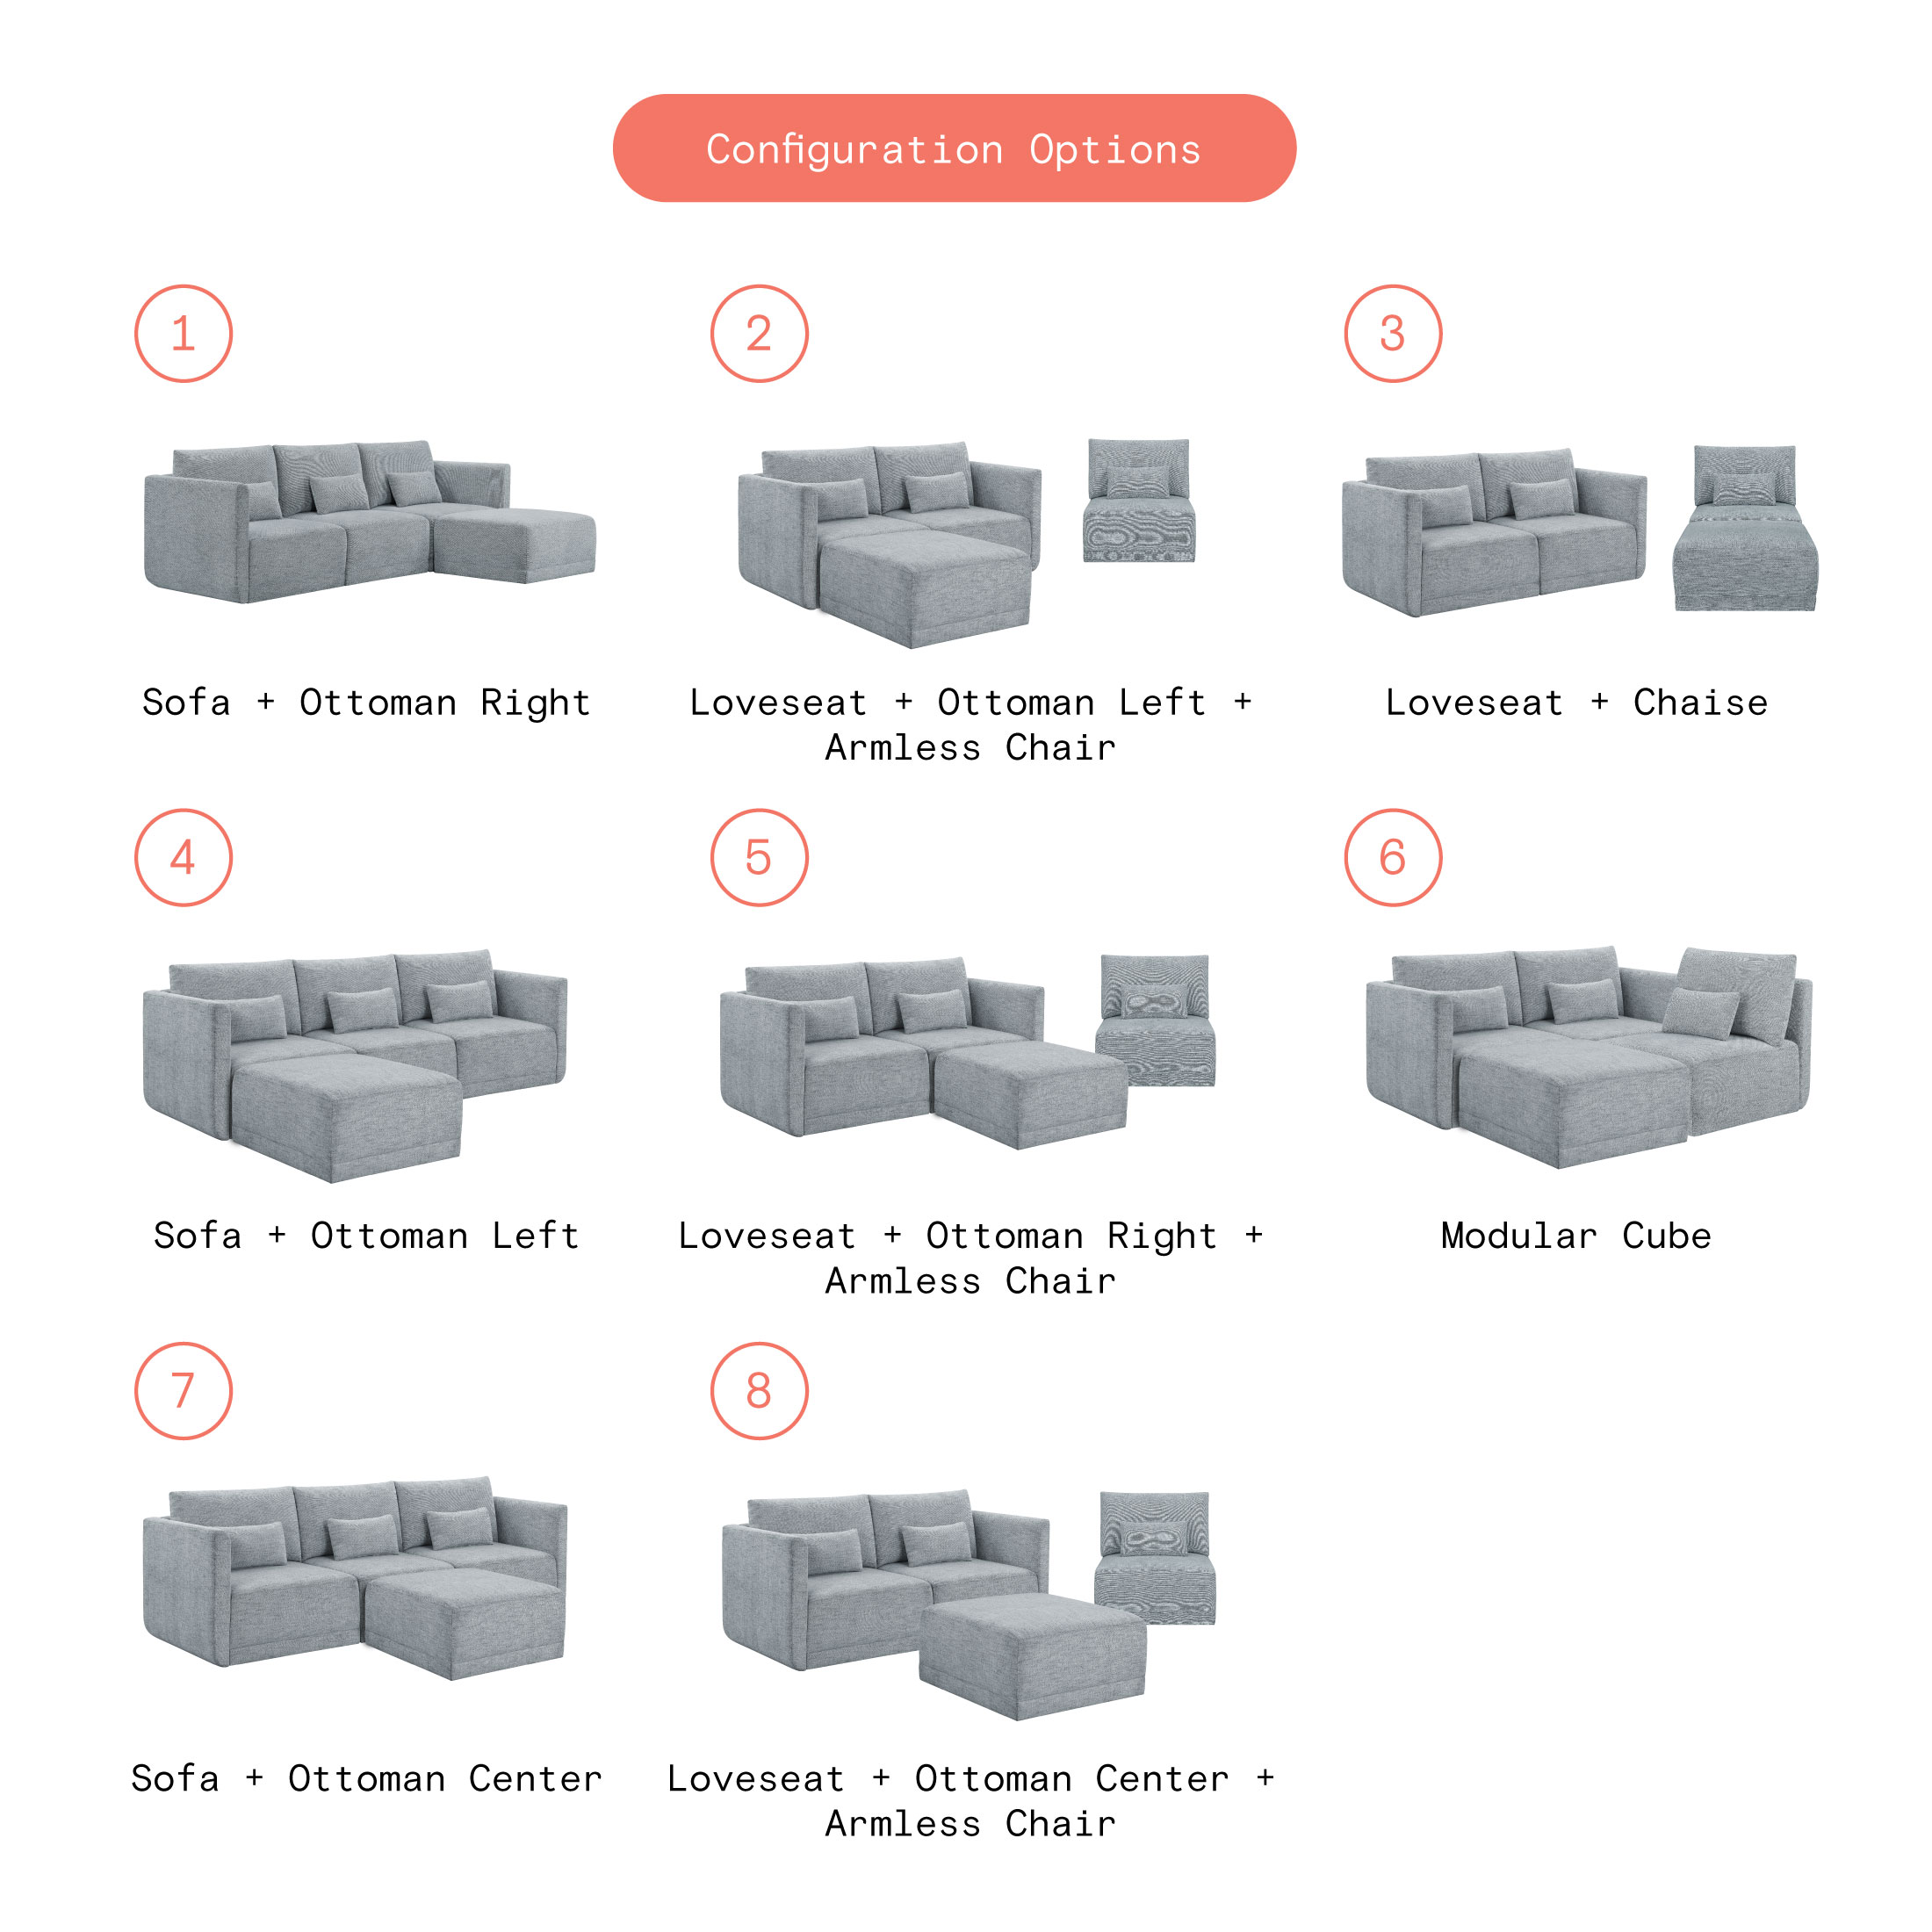 Beautiful Drew Modular Sectional Sofa with Ottoman by Drew Barrymore, Gray Fabric - image 2 of 15